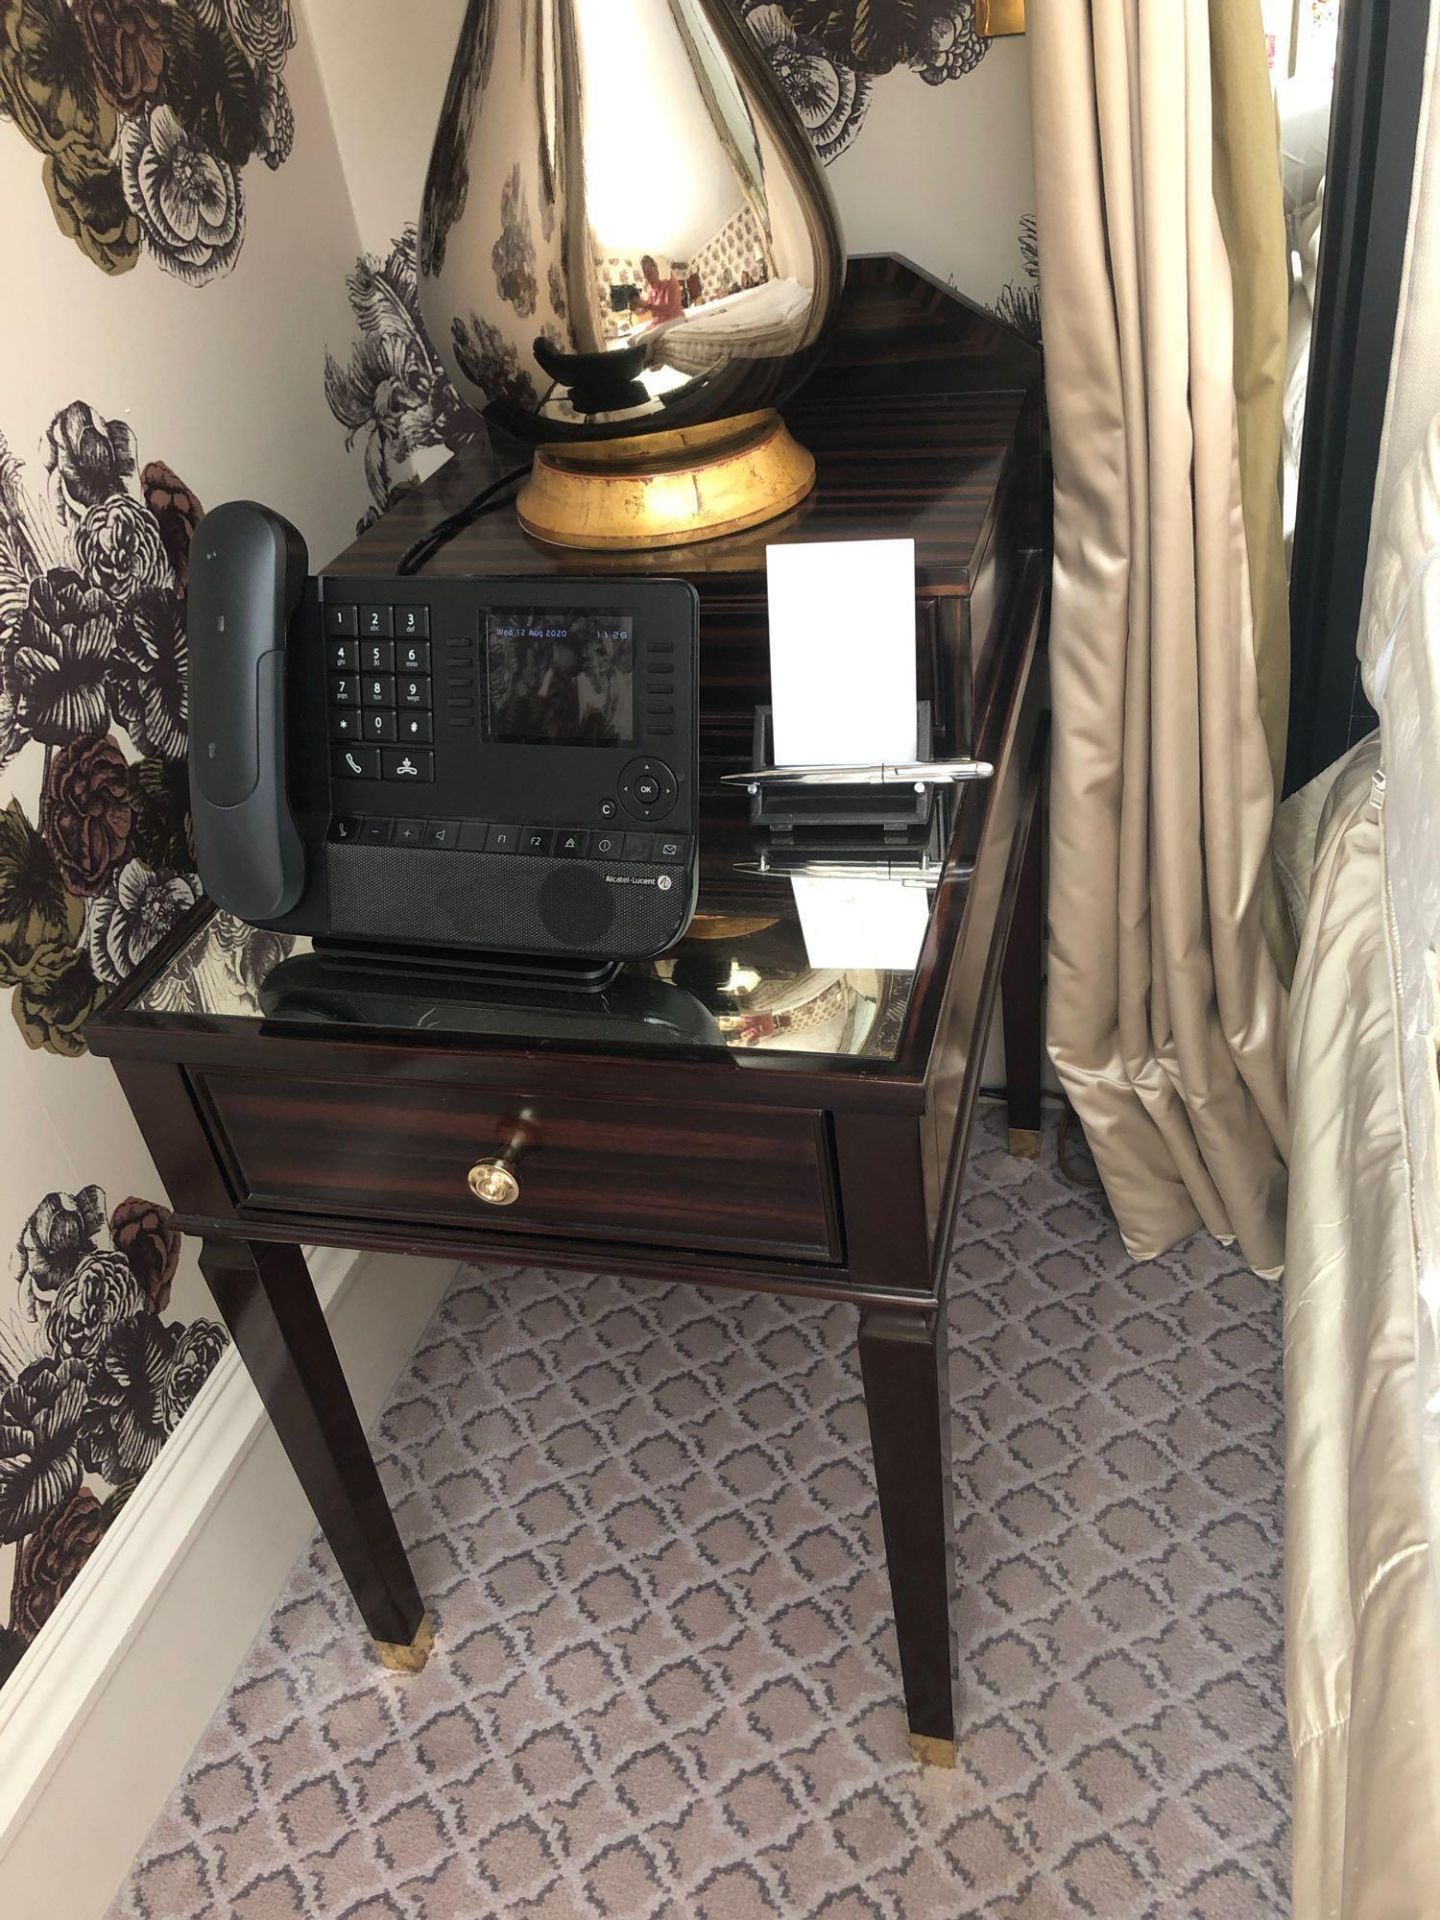 A Pair Of Two Tier Bedside Nightstands With Antiqued Plate Top With Storage Compartments Mounted